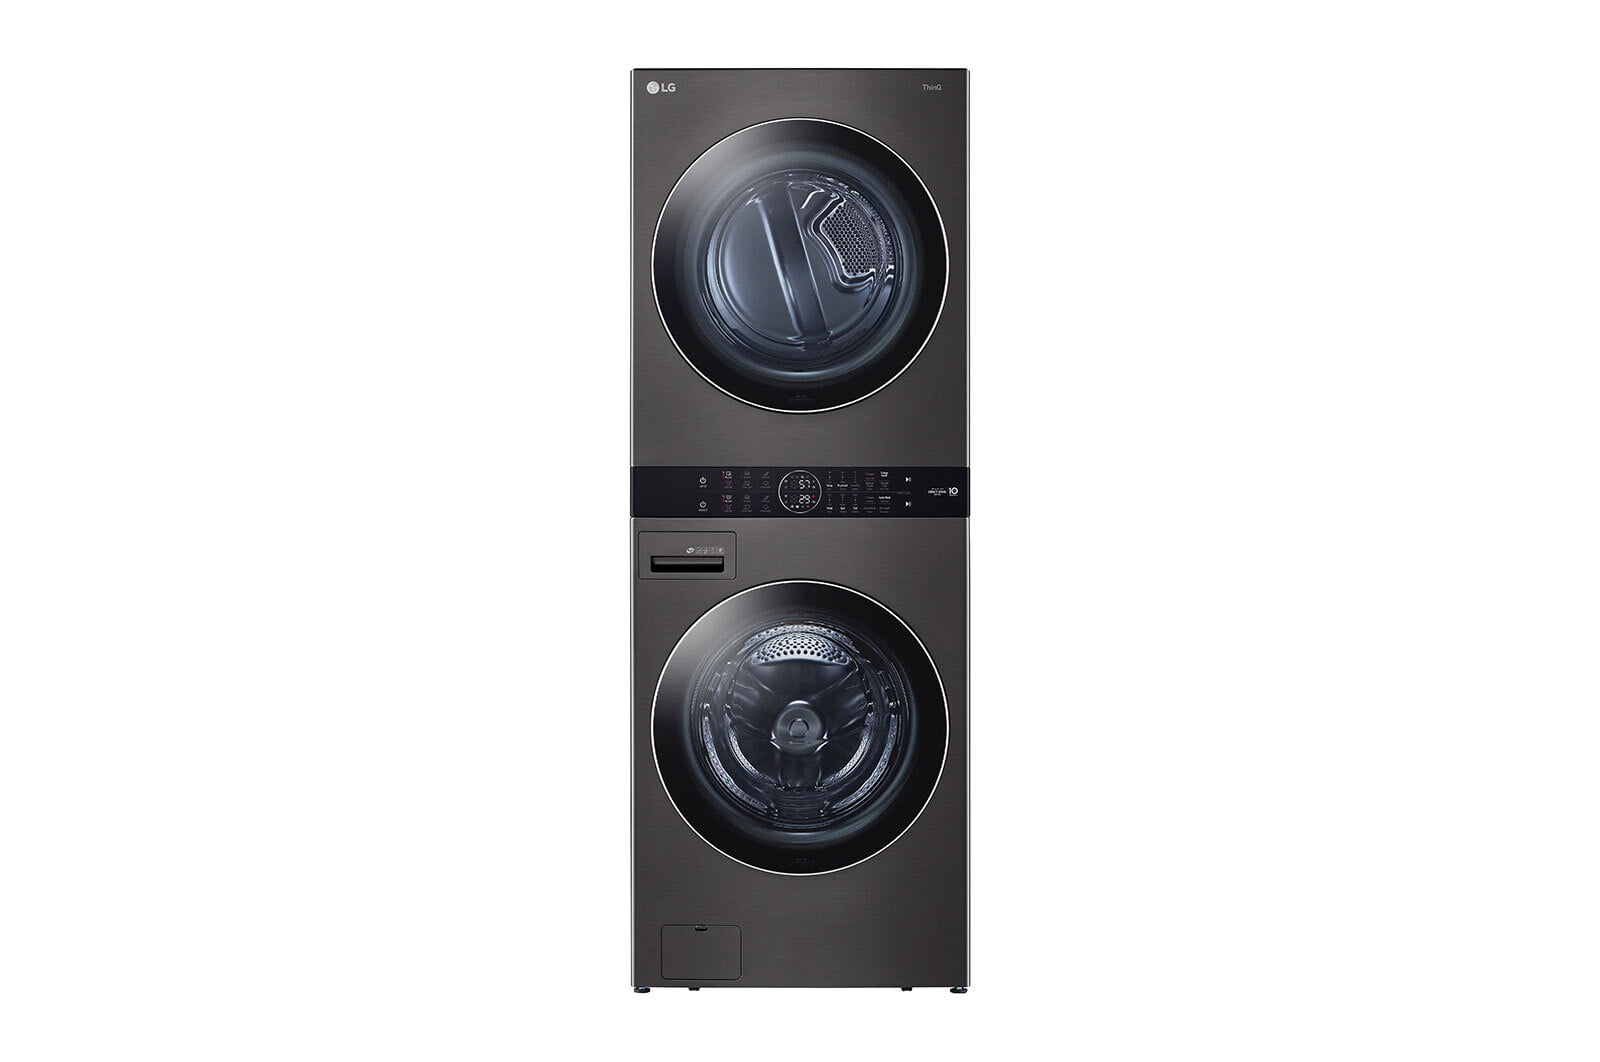 Lg WKEX200HBA Single Unit Front Load Lg Washtower™ With Center Control™ 4.5 Cu. Ft. Washer And 7.4 Cu. Ft. Electric Dryer